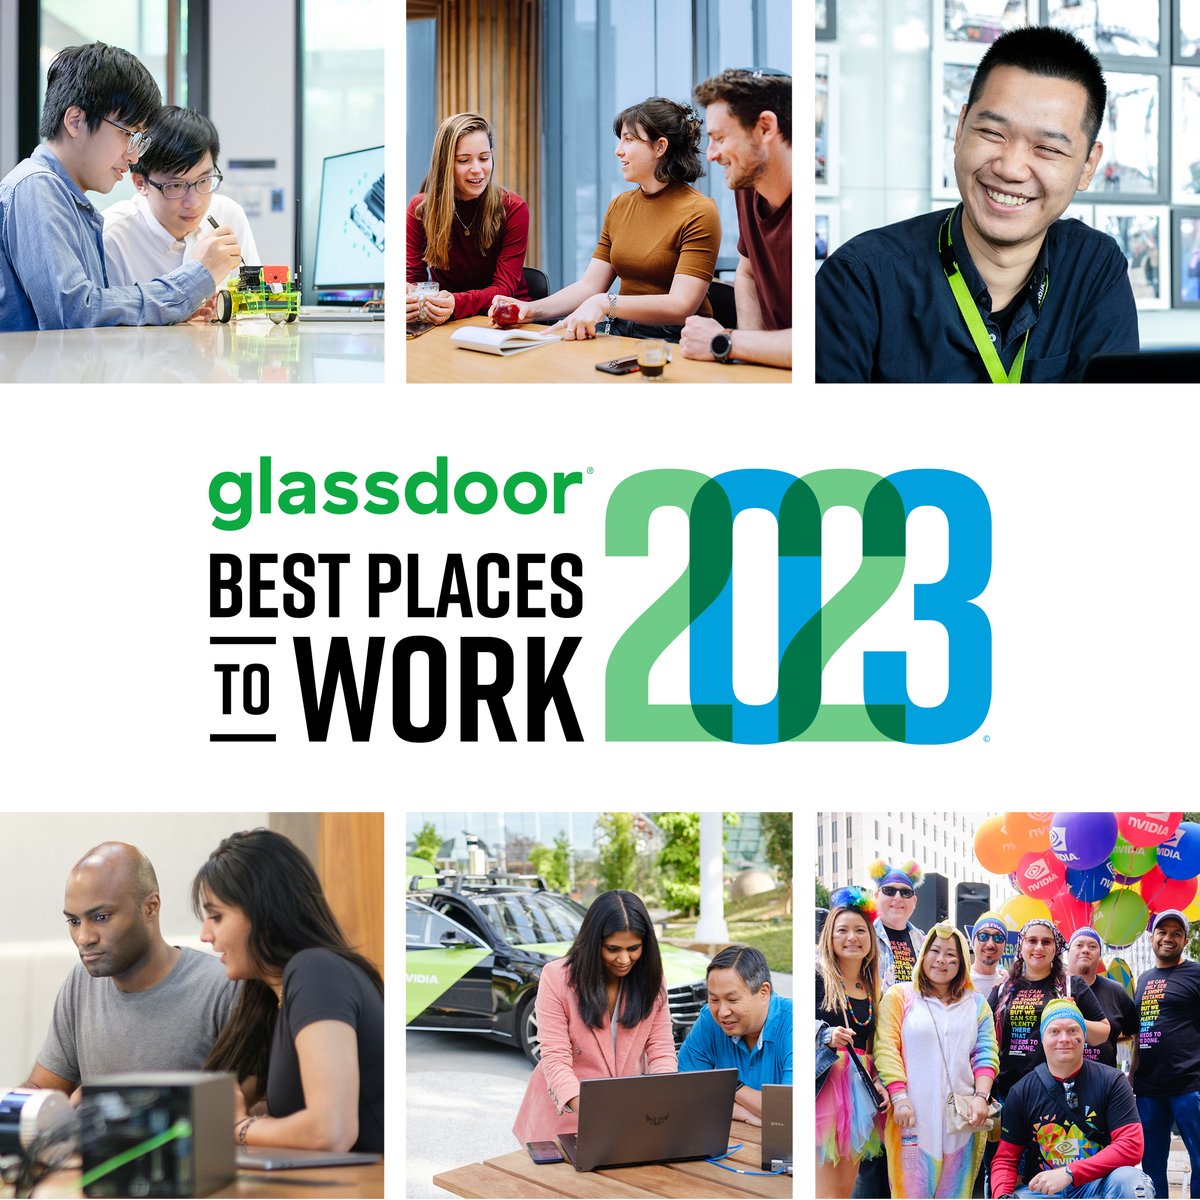 Thanks to our employees, NVIDIA is again one of the Best U.S. Workplaces, according to @Glassdoor. Learn more about us: nvda.ws/3CGh72V #GlassdoorBPTW #NVIDIAlife